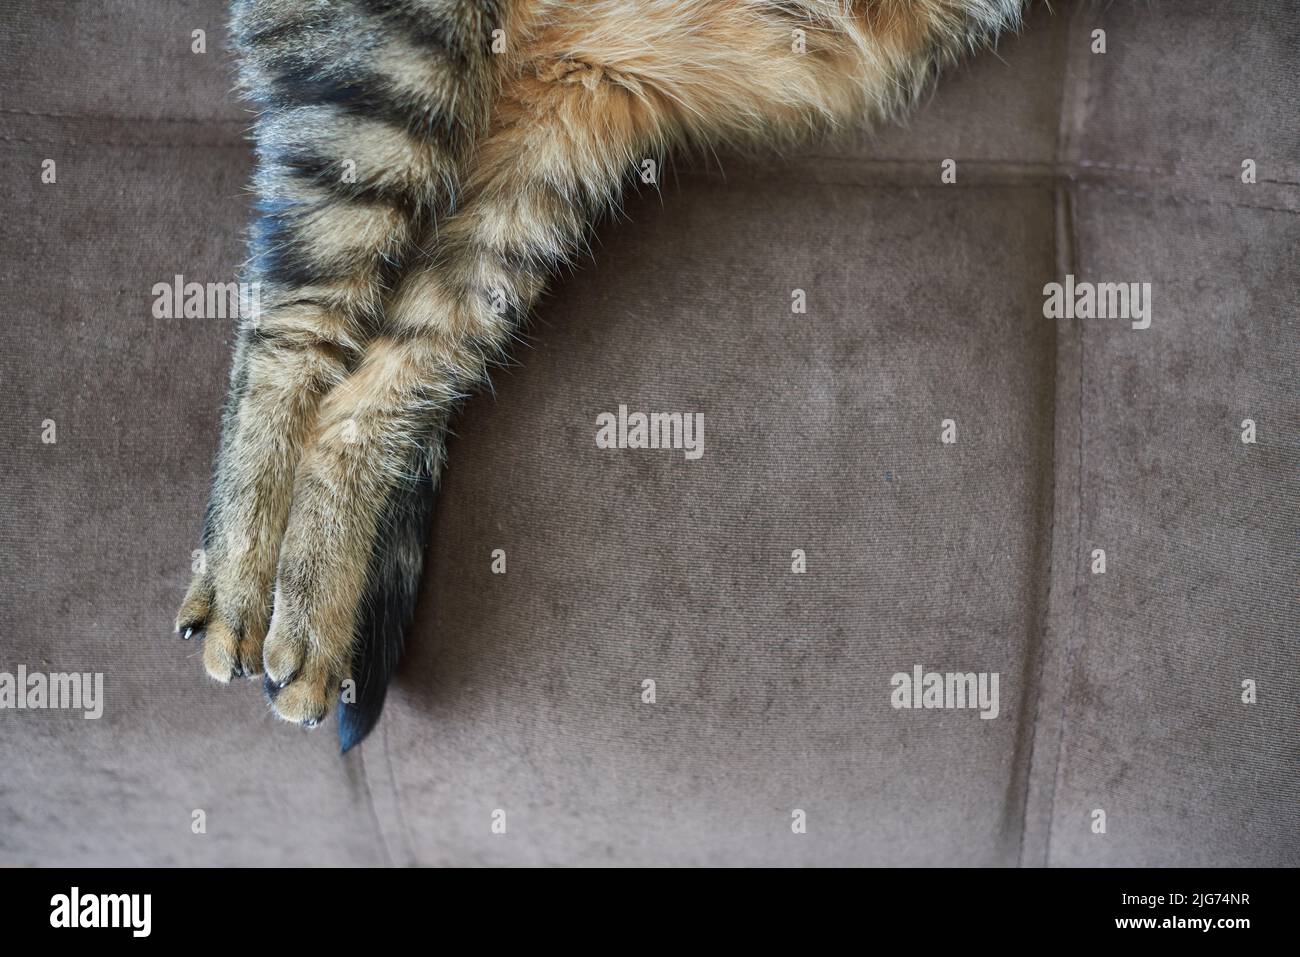 Hind paws of a cat close-up on the couch. Stock Photo